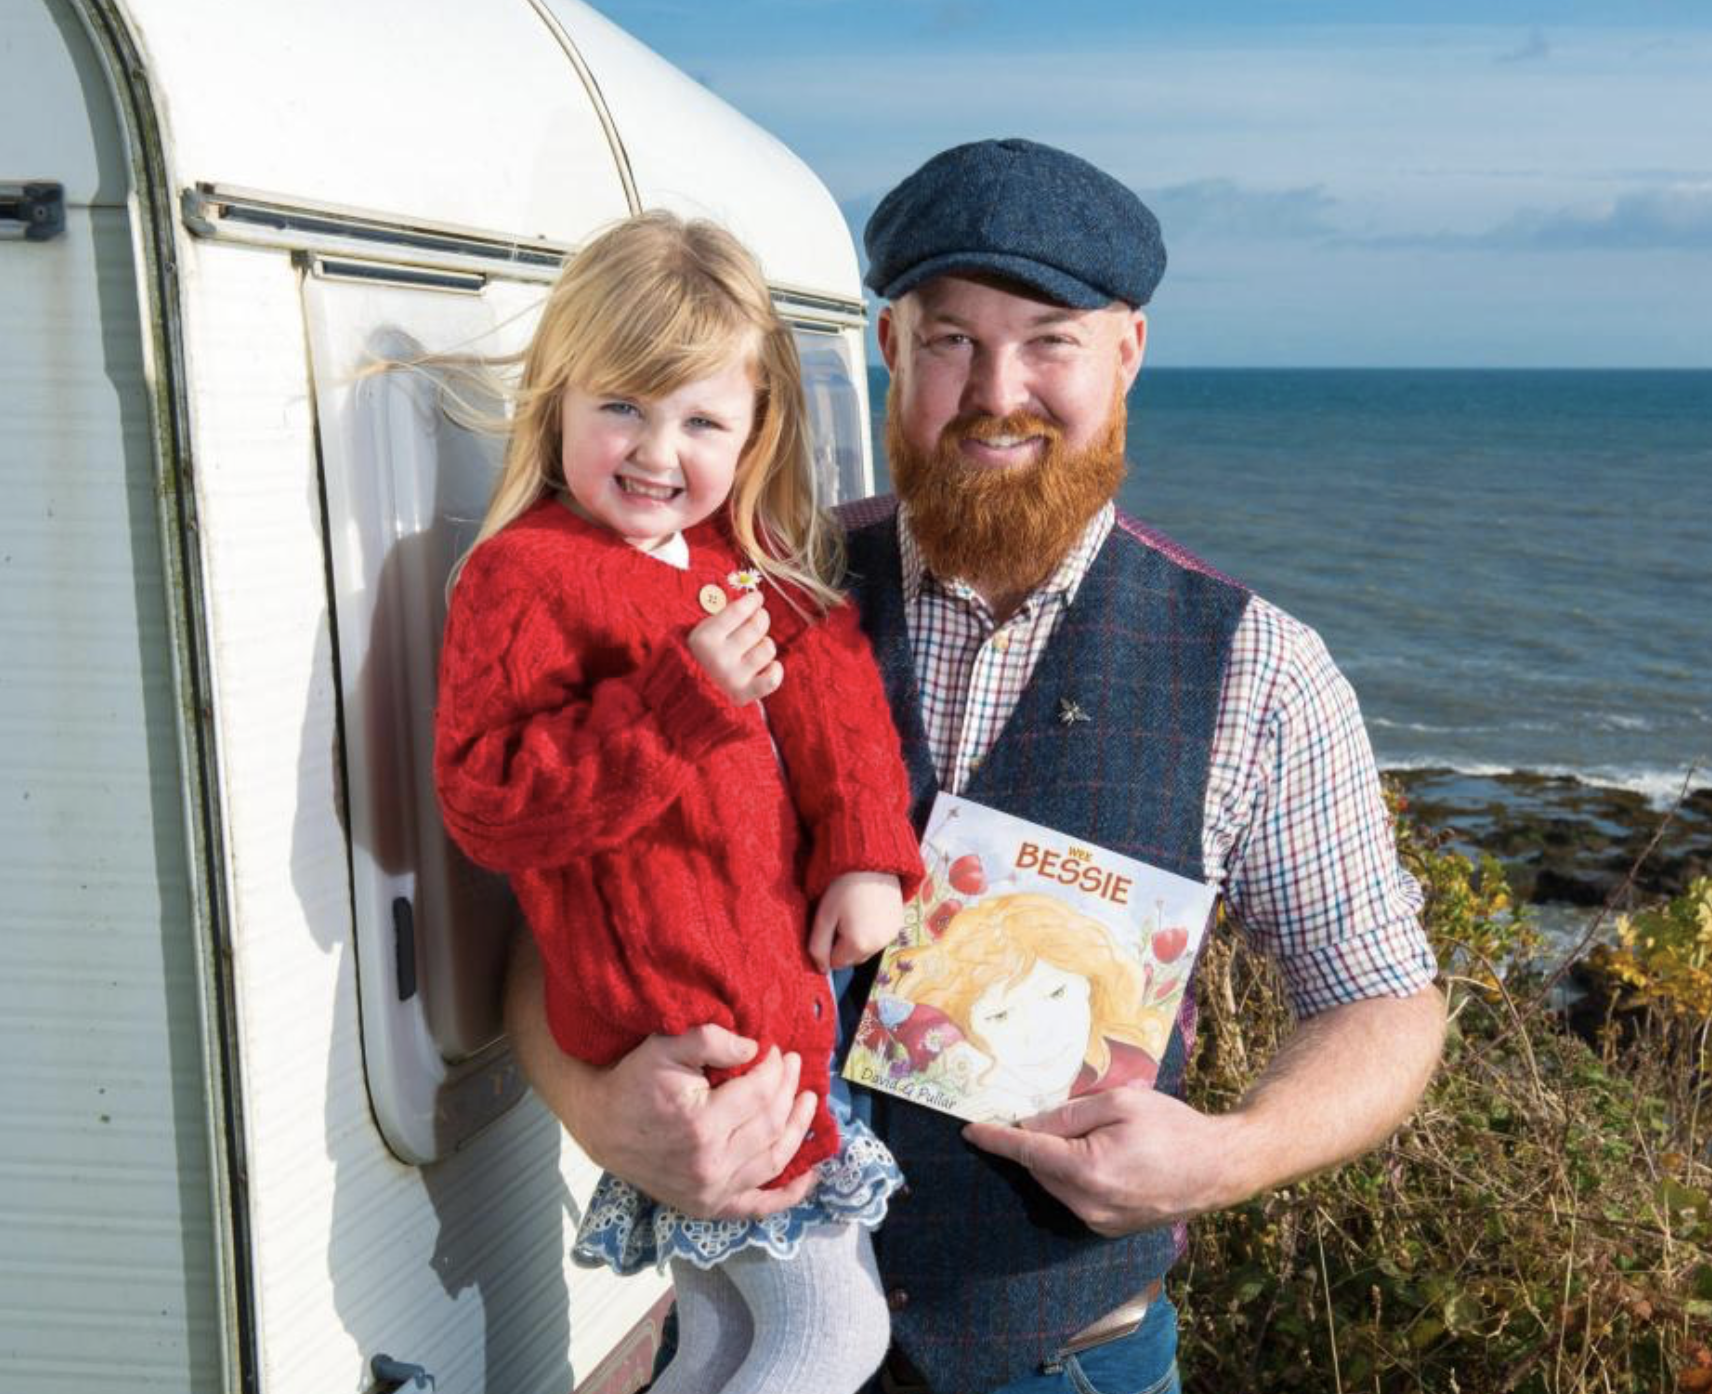 David Pullar holding his daughter and his children book Wee Bessie. A white trailer to the left and the ocean to the right. 